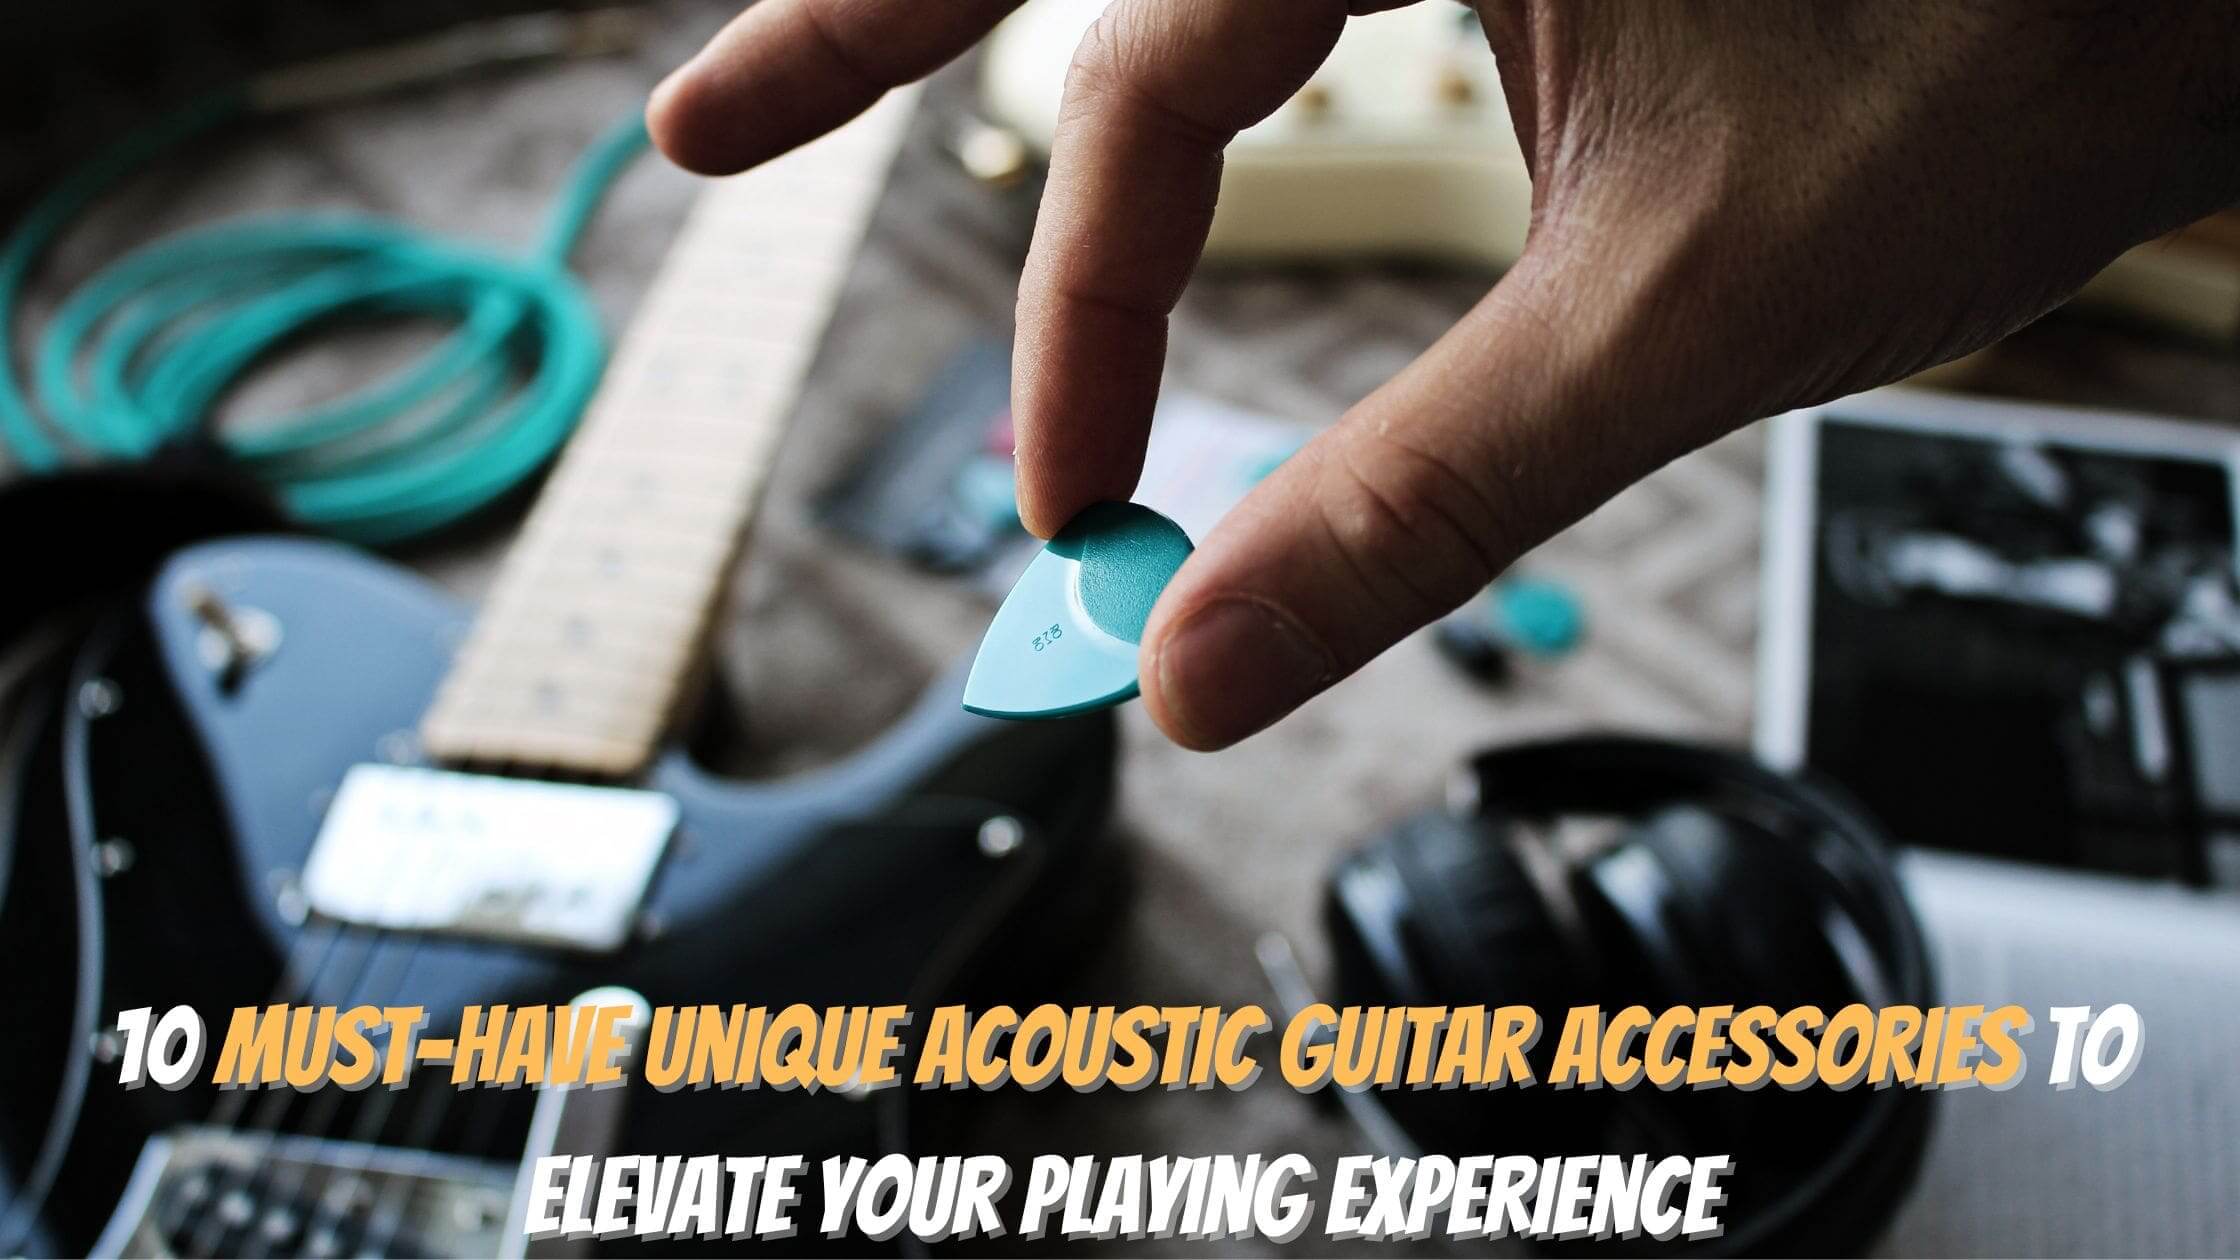 10 Must-Have Unique Acoustic Guitar Accessories Your Playing Experience